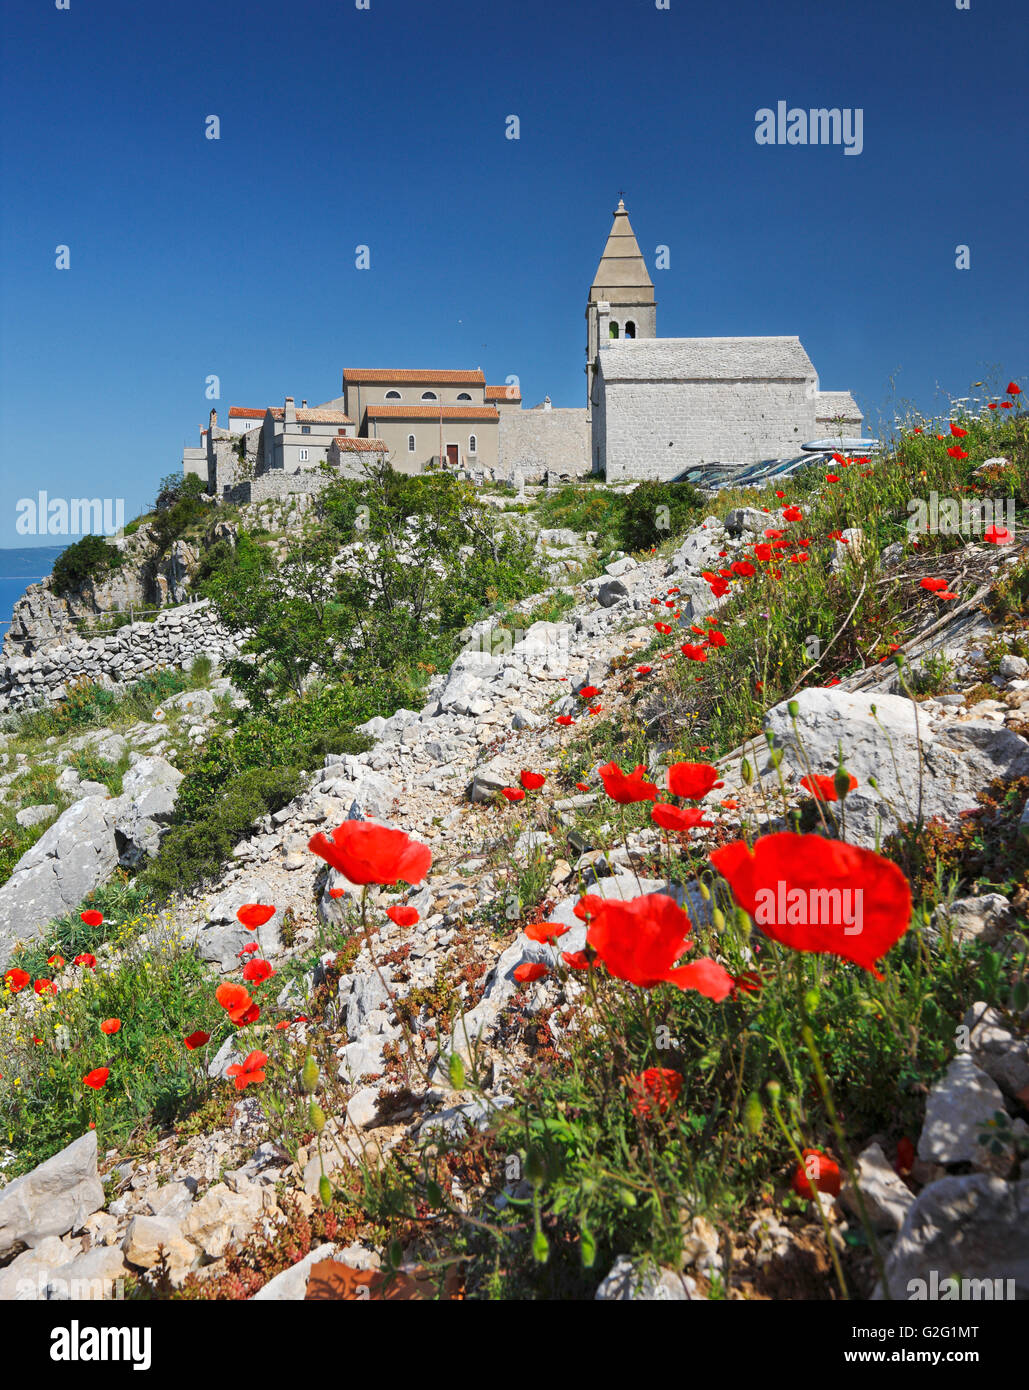 The hilly Lubenice town on the Island of Cres with poppy flowers in the front Stock Photo